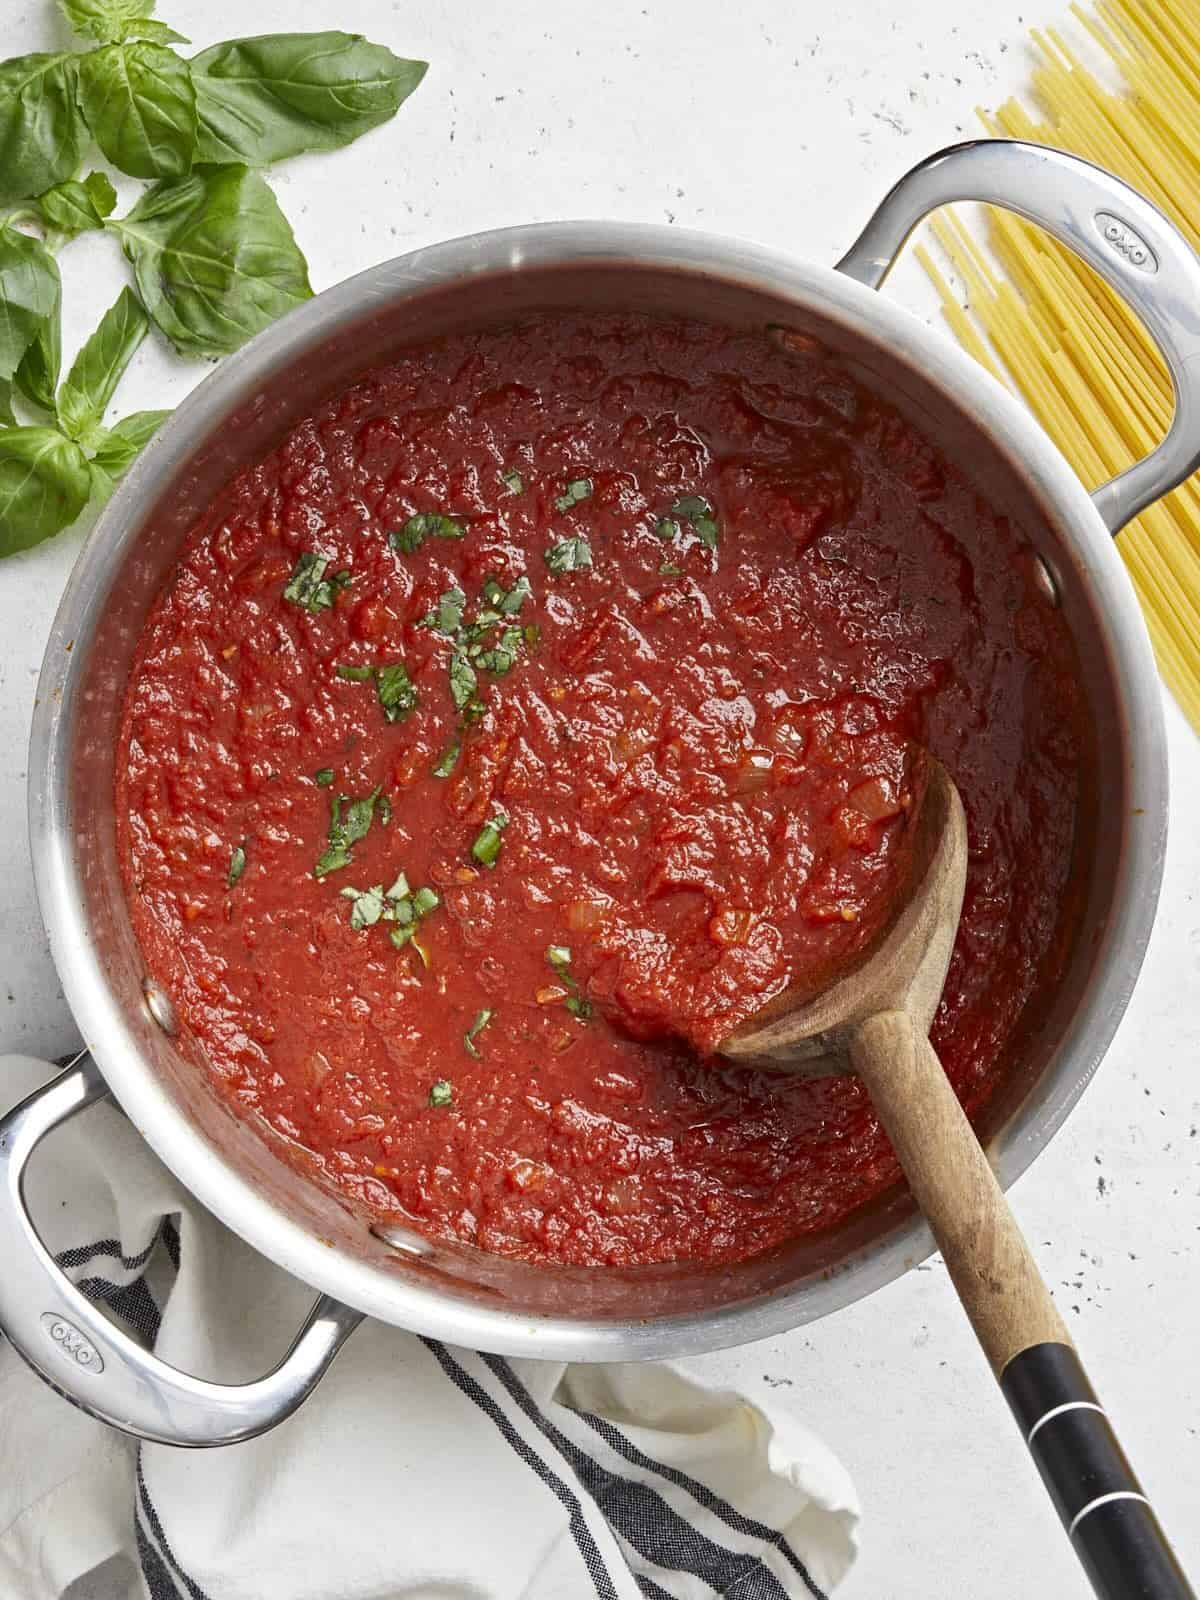 Overhead view of a pot full of homemade marinara sauce with a wooden spoon in the center.